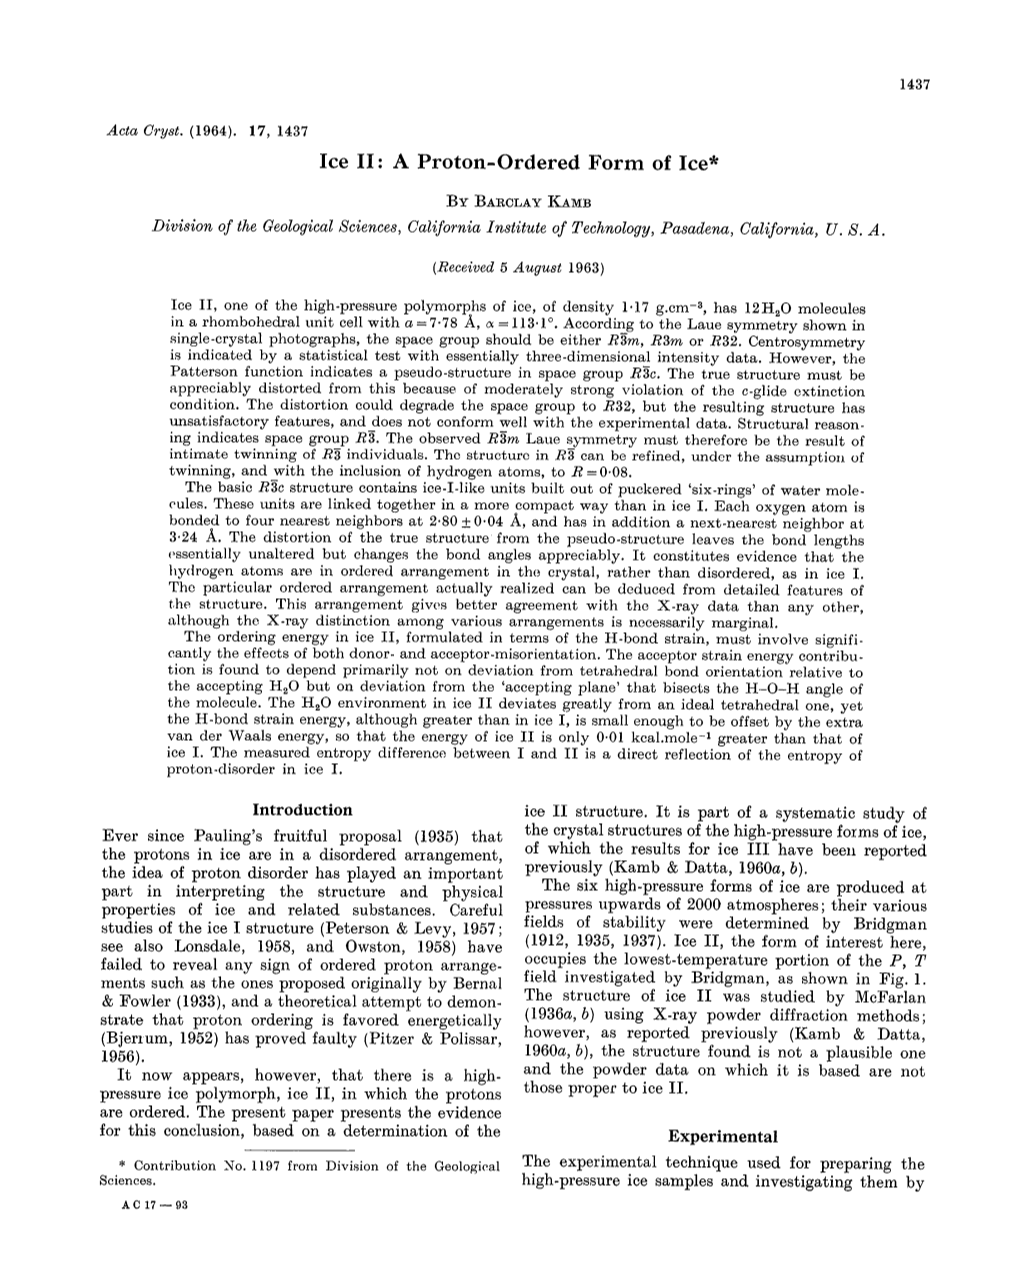 Ice. II. a Proton-Ordered Form Of